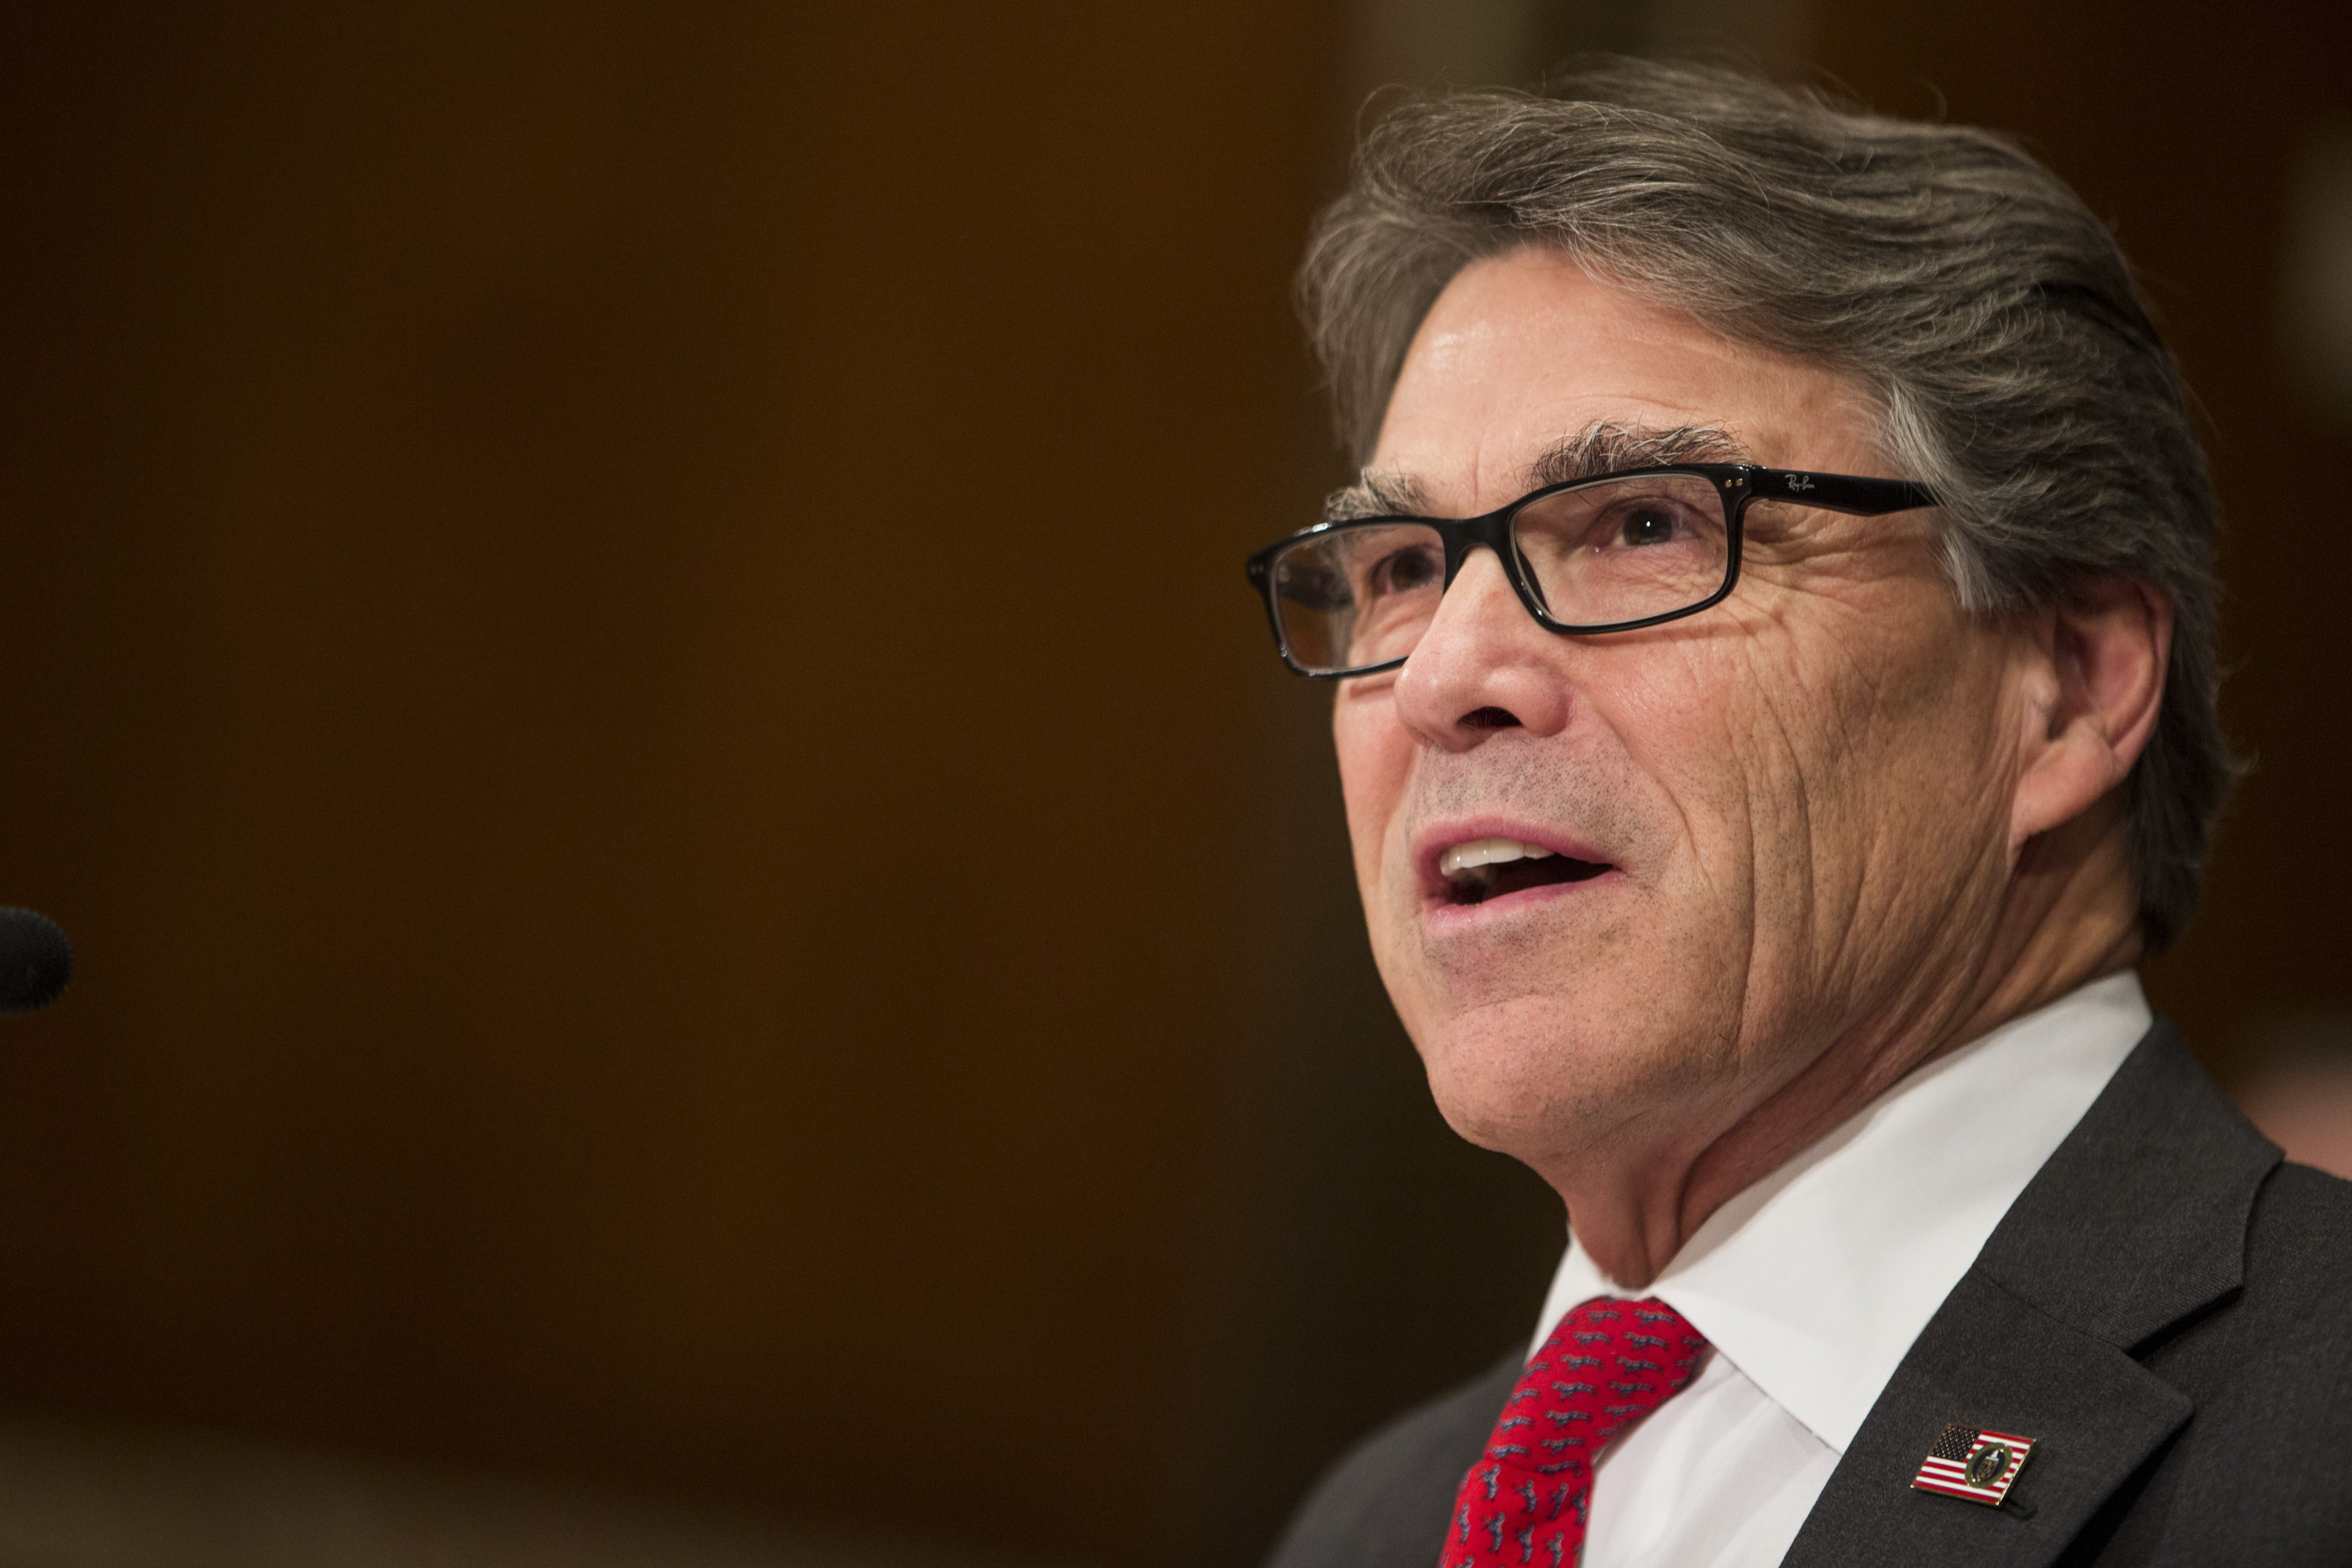 Rick Perry, U.S. secretary of energy, speaks during a Senate Appropriations Subcommittee hearing in Washington, D.C., U.S., on Wednesday, June 21, 2017. (Bloomberg&mdash;Bloomberg via Getty Images)